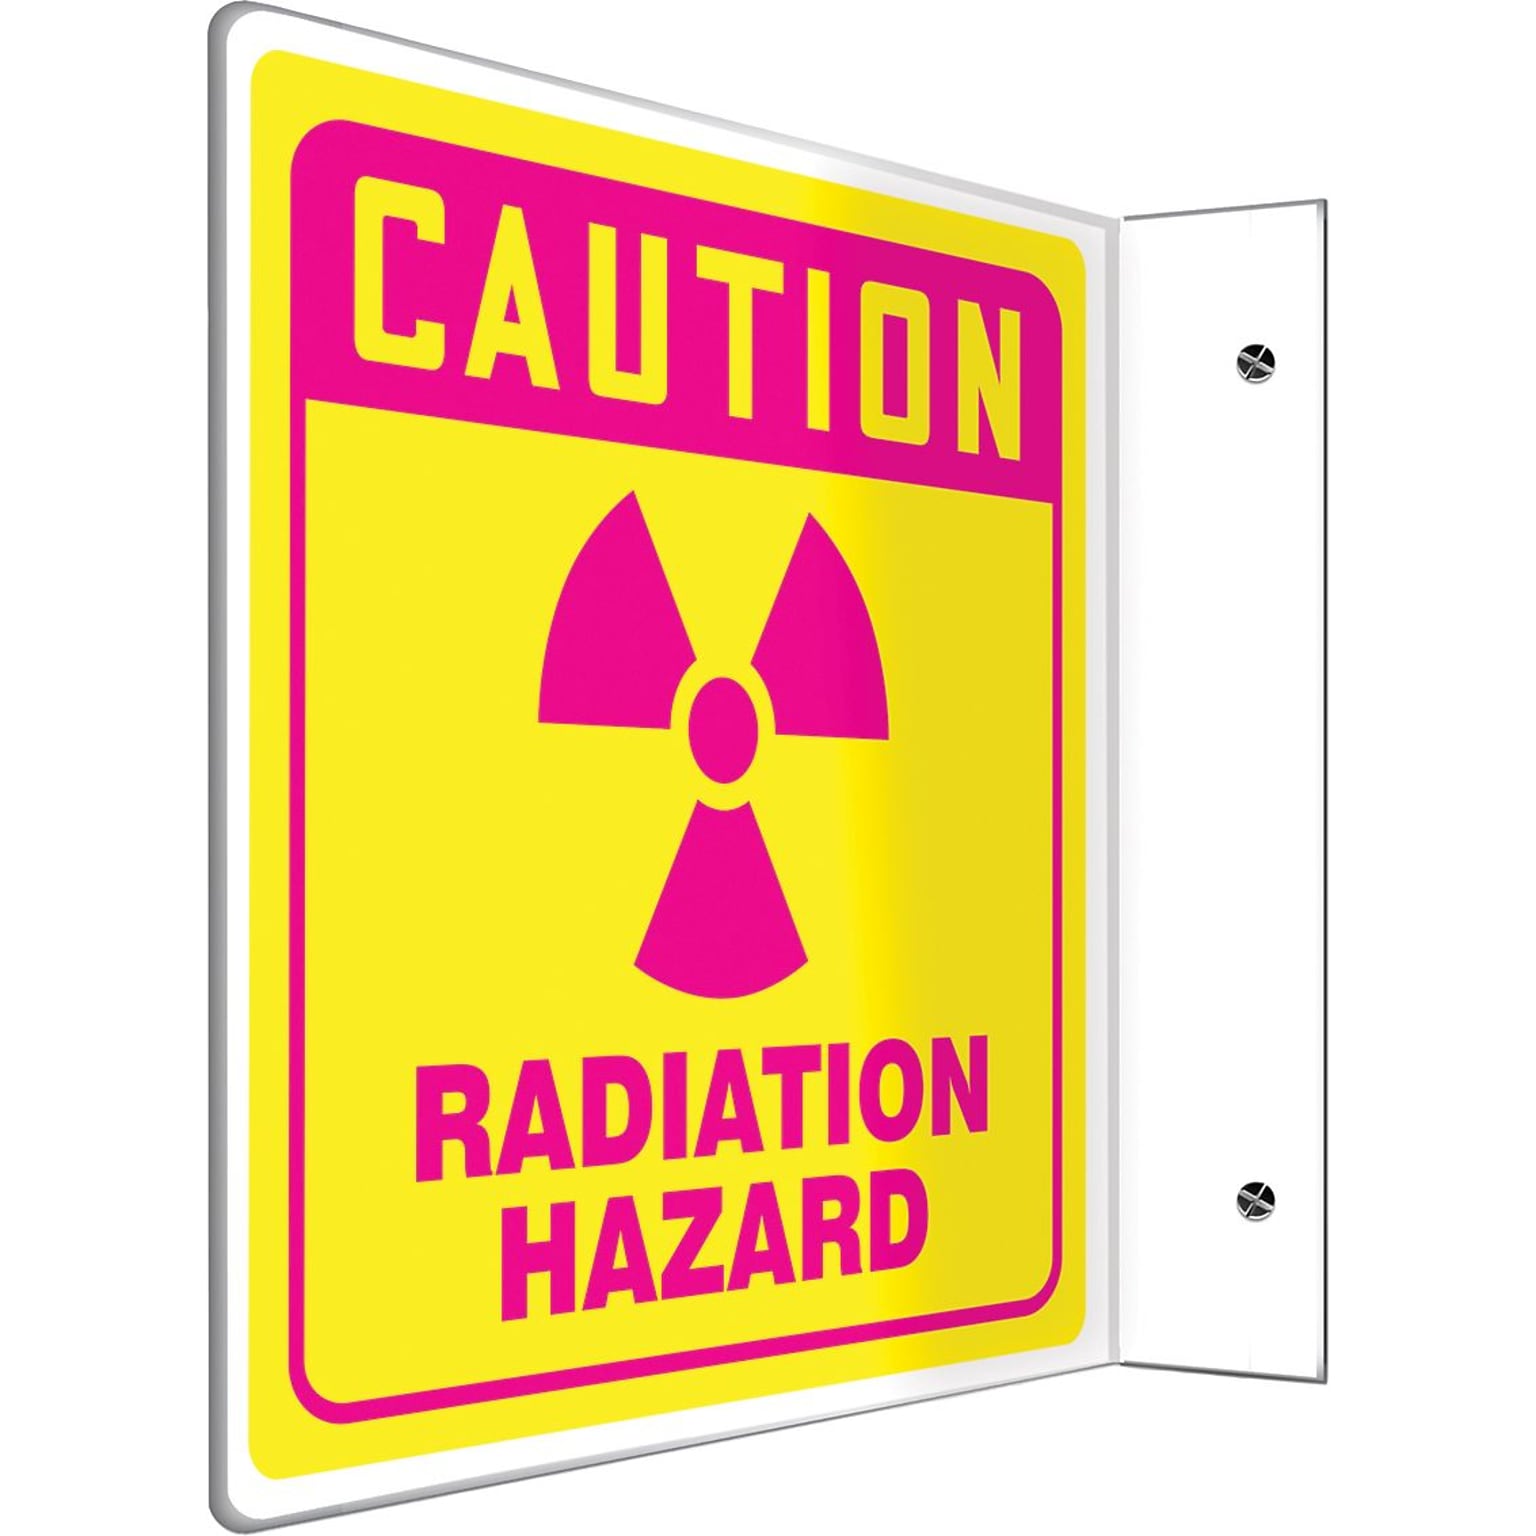 Accuform Radiation Hazard Projection Sign, Pink/Yellow, 8H x 8W (PSP771)